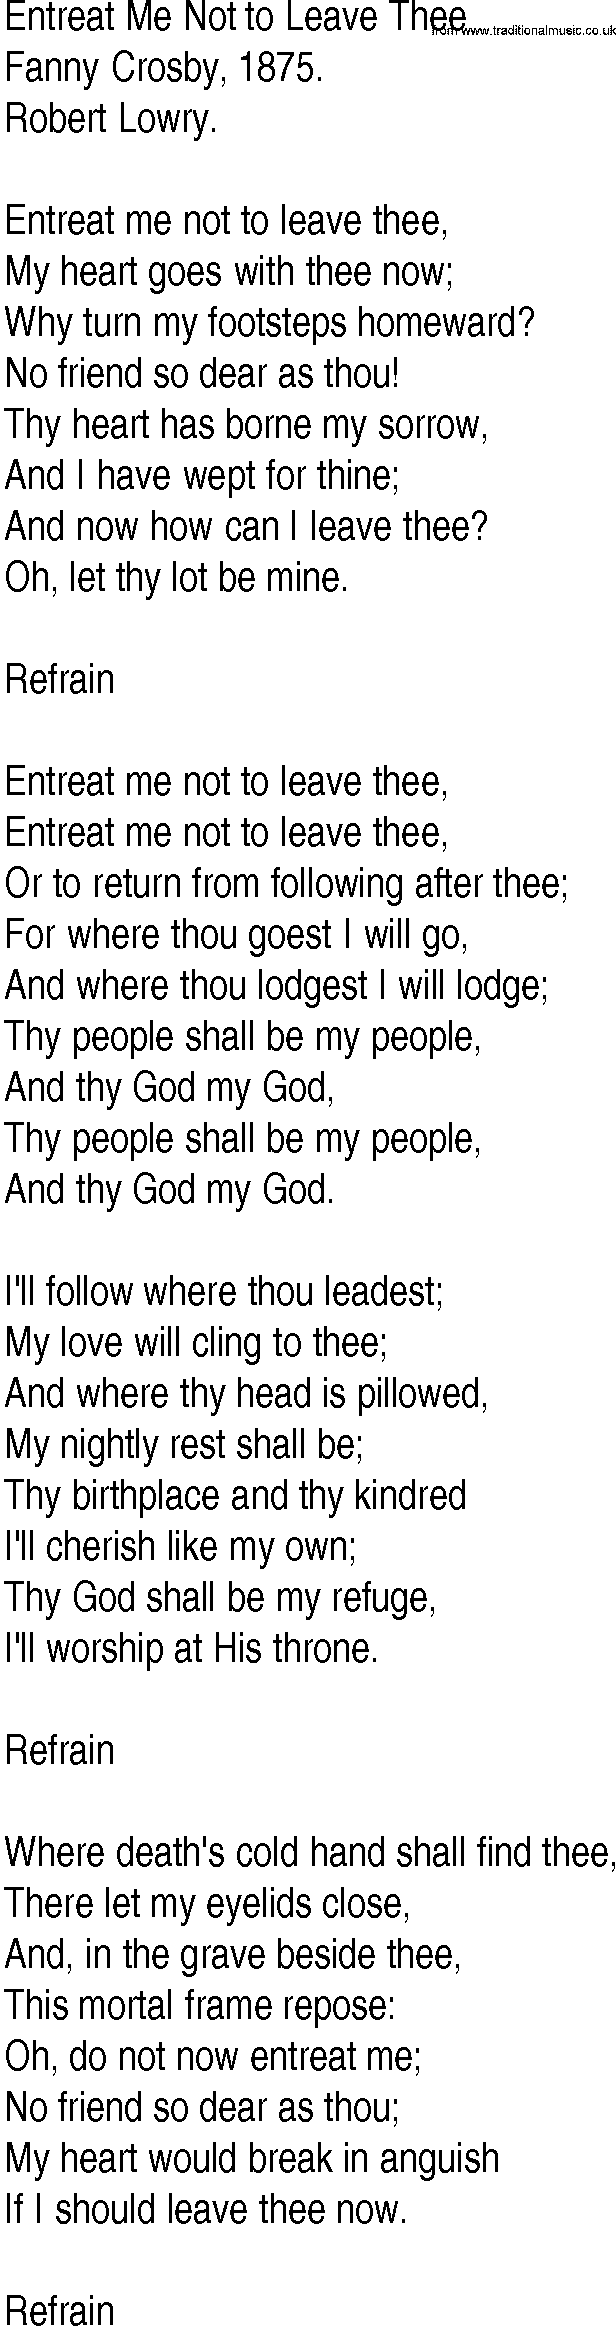 Hymn and Gospel Song: Entreat Me Not to Leave Thee by Fanny Crosby lyrics